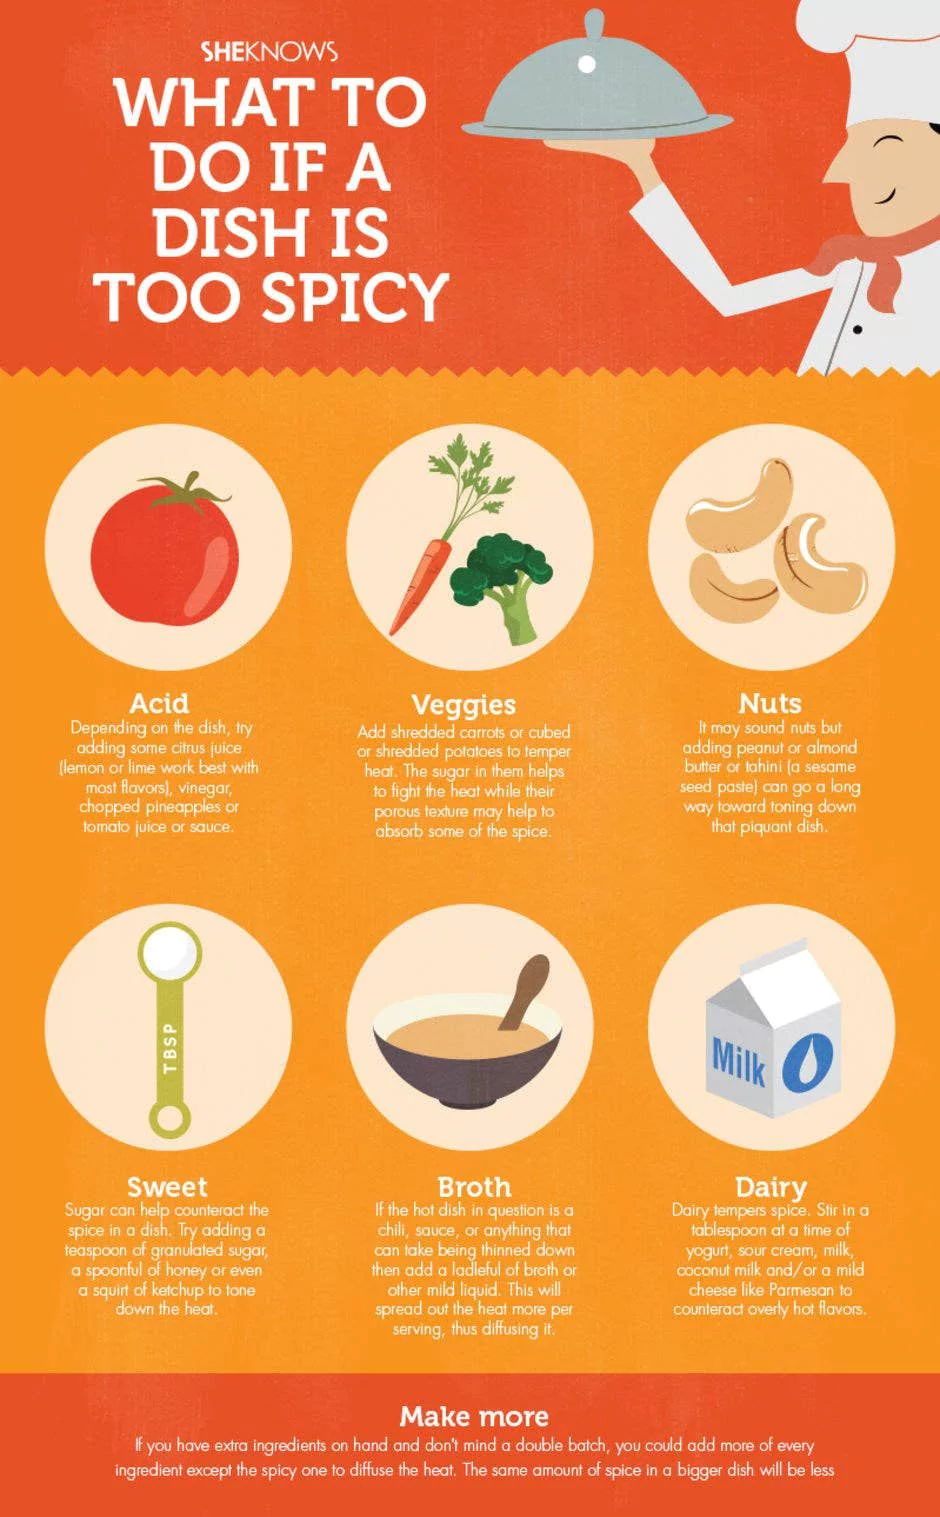 What To Do If A Dish Too Spicy